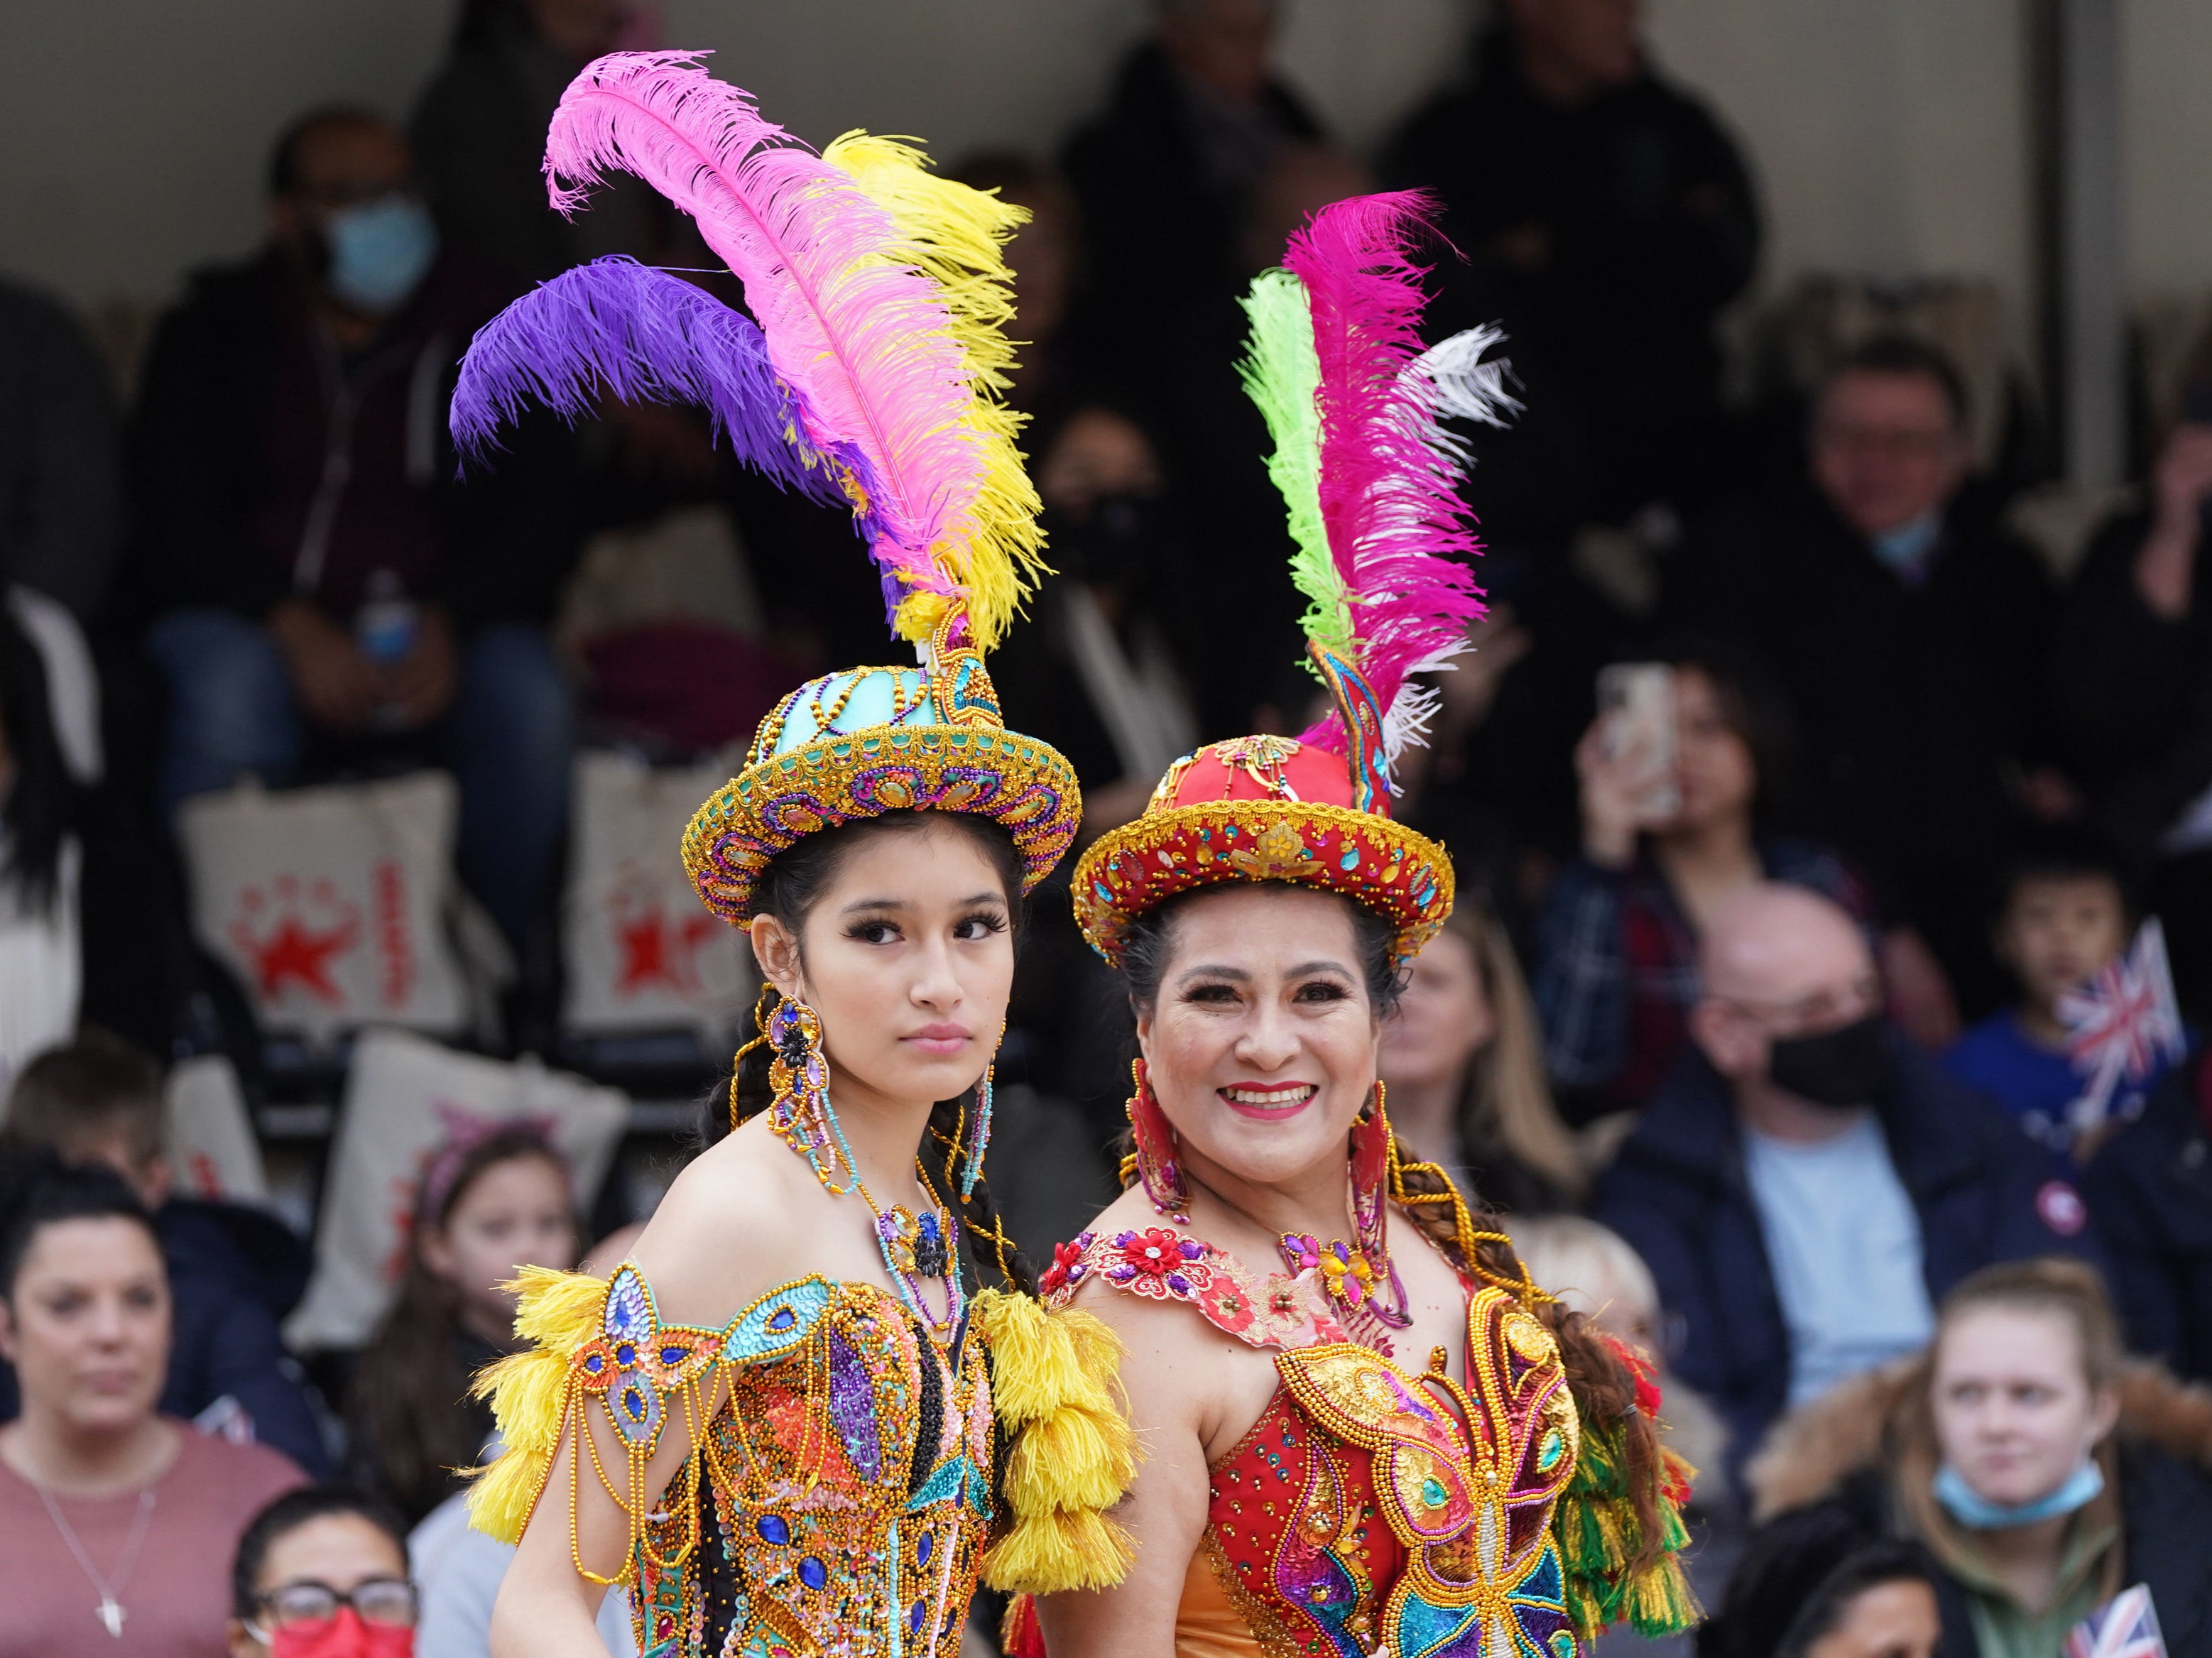 Bolivian cultural dancers wait to perform at London’s New Year’s Day parade in Waterloo Place, London